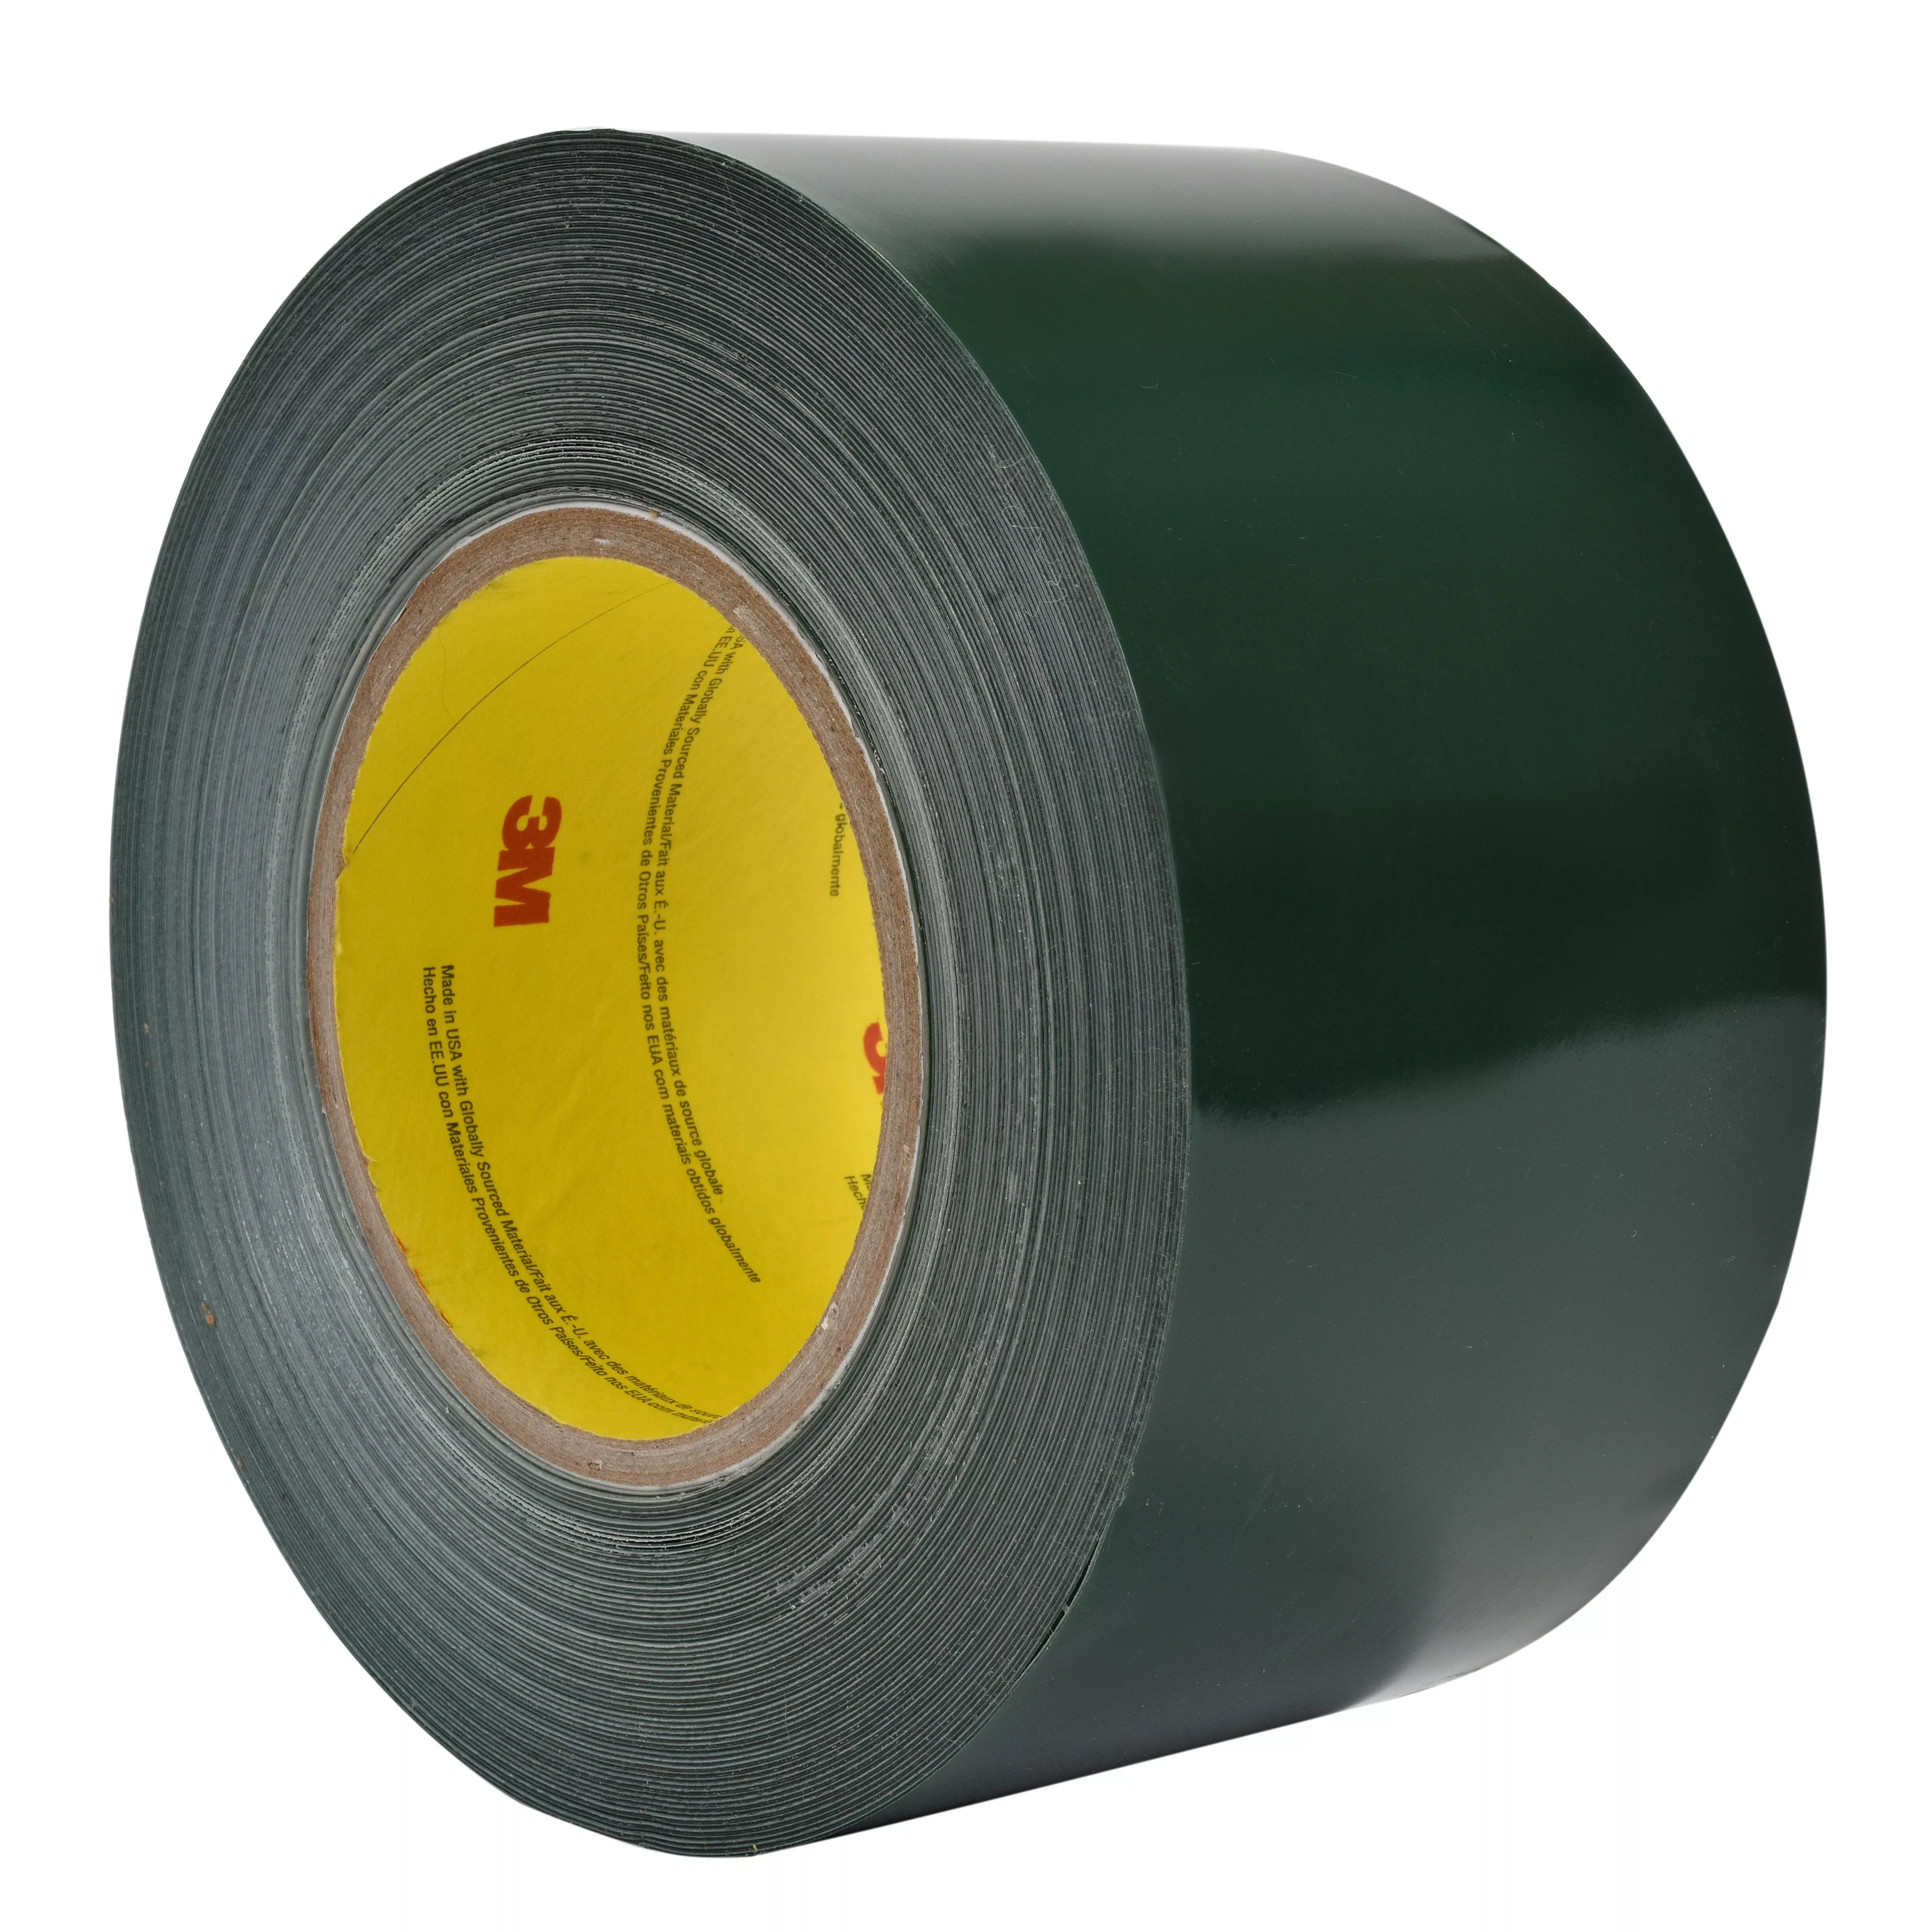 3M™ Sealing and Holding Tape 8069, 4 in x 25 yd, 8 Roll/Case, Solid
Liner